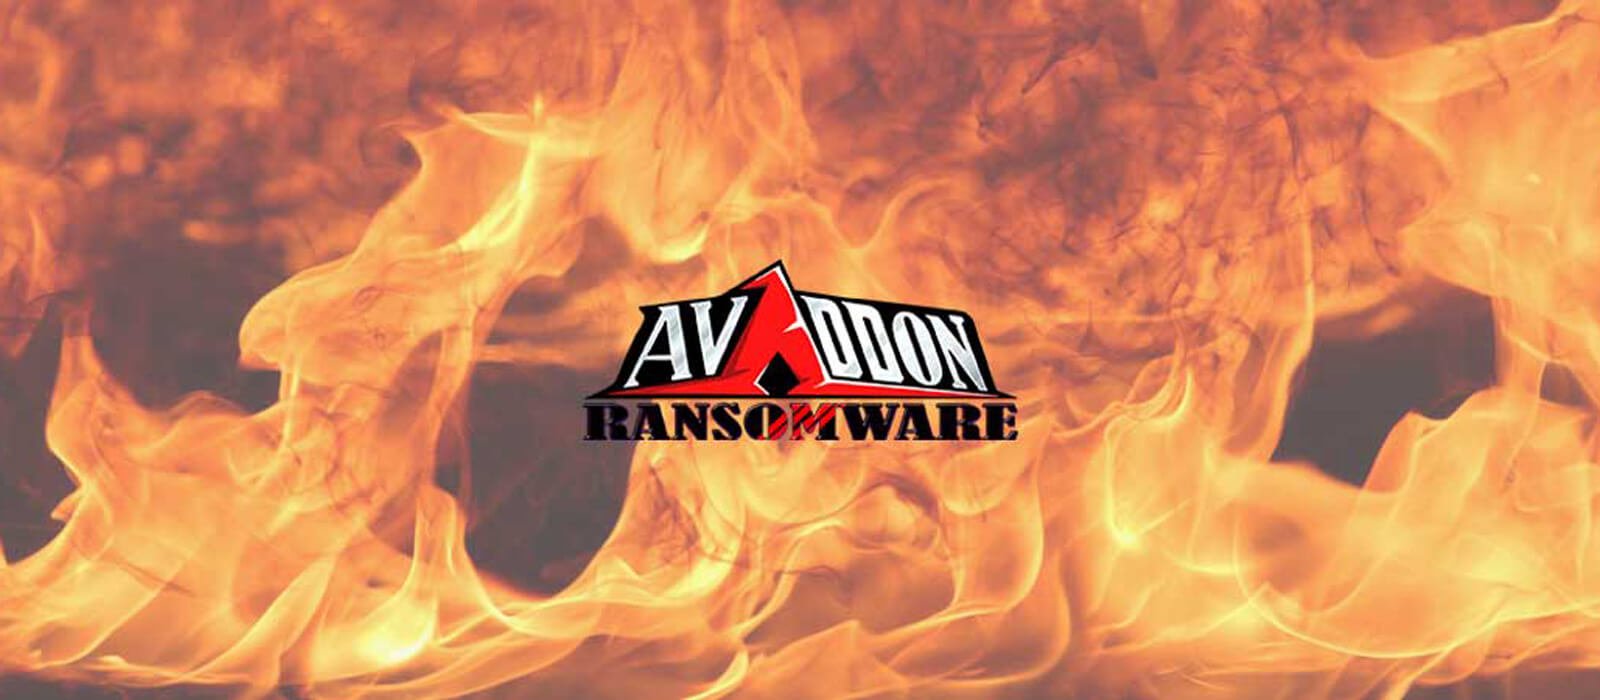 Avaddon ransomware launches data leak site to extort victims